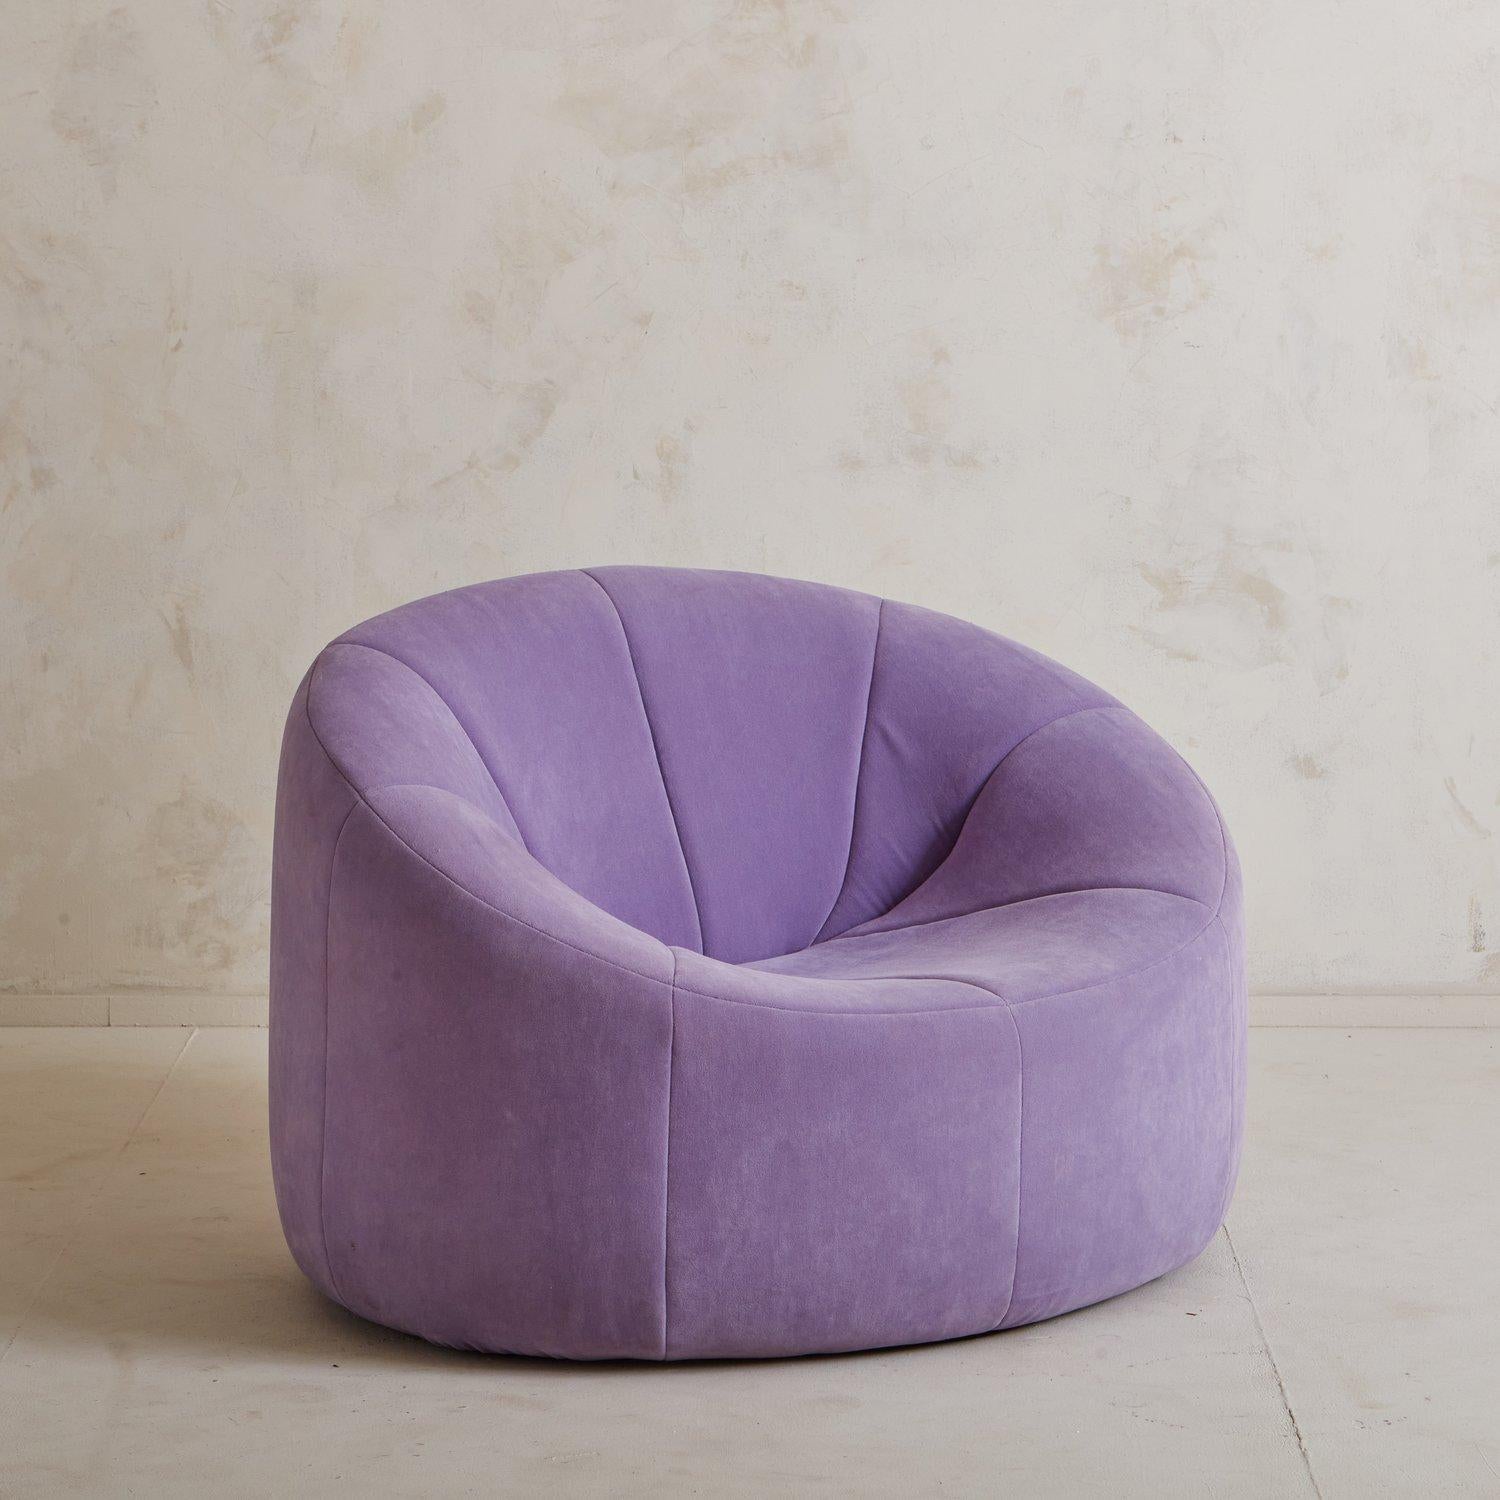 An iconic Pumpkin chair designed by Pierre Paulin in 1971 and produced in France by Alpha. This iconic chair retains its original purple suede upholstery and ‘Made in France’ tag on the seat back. Sourced in France.

This chair was designed for the